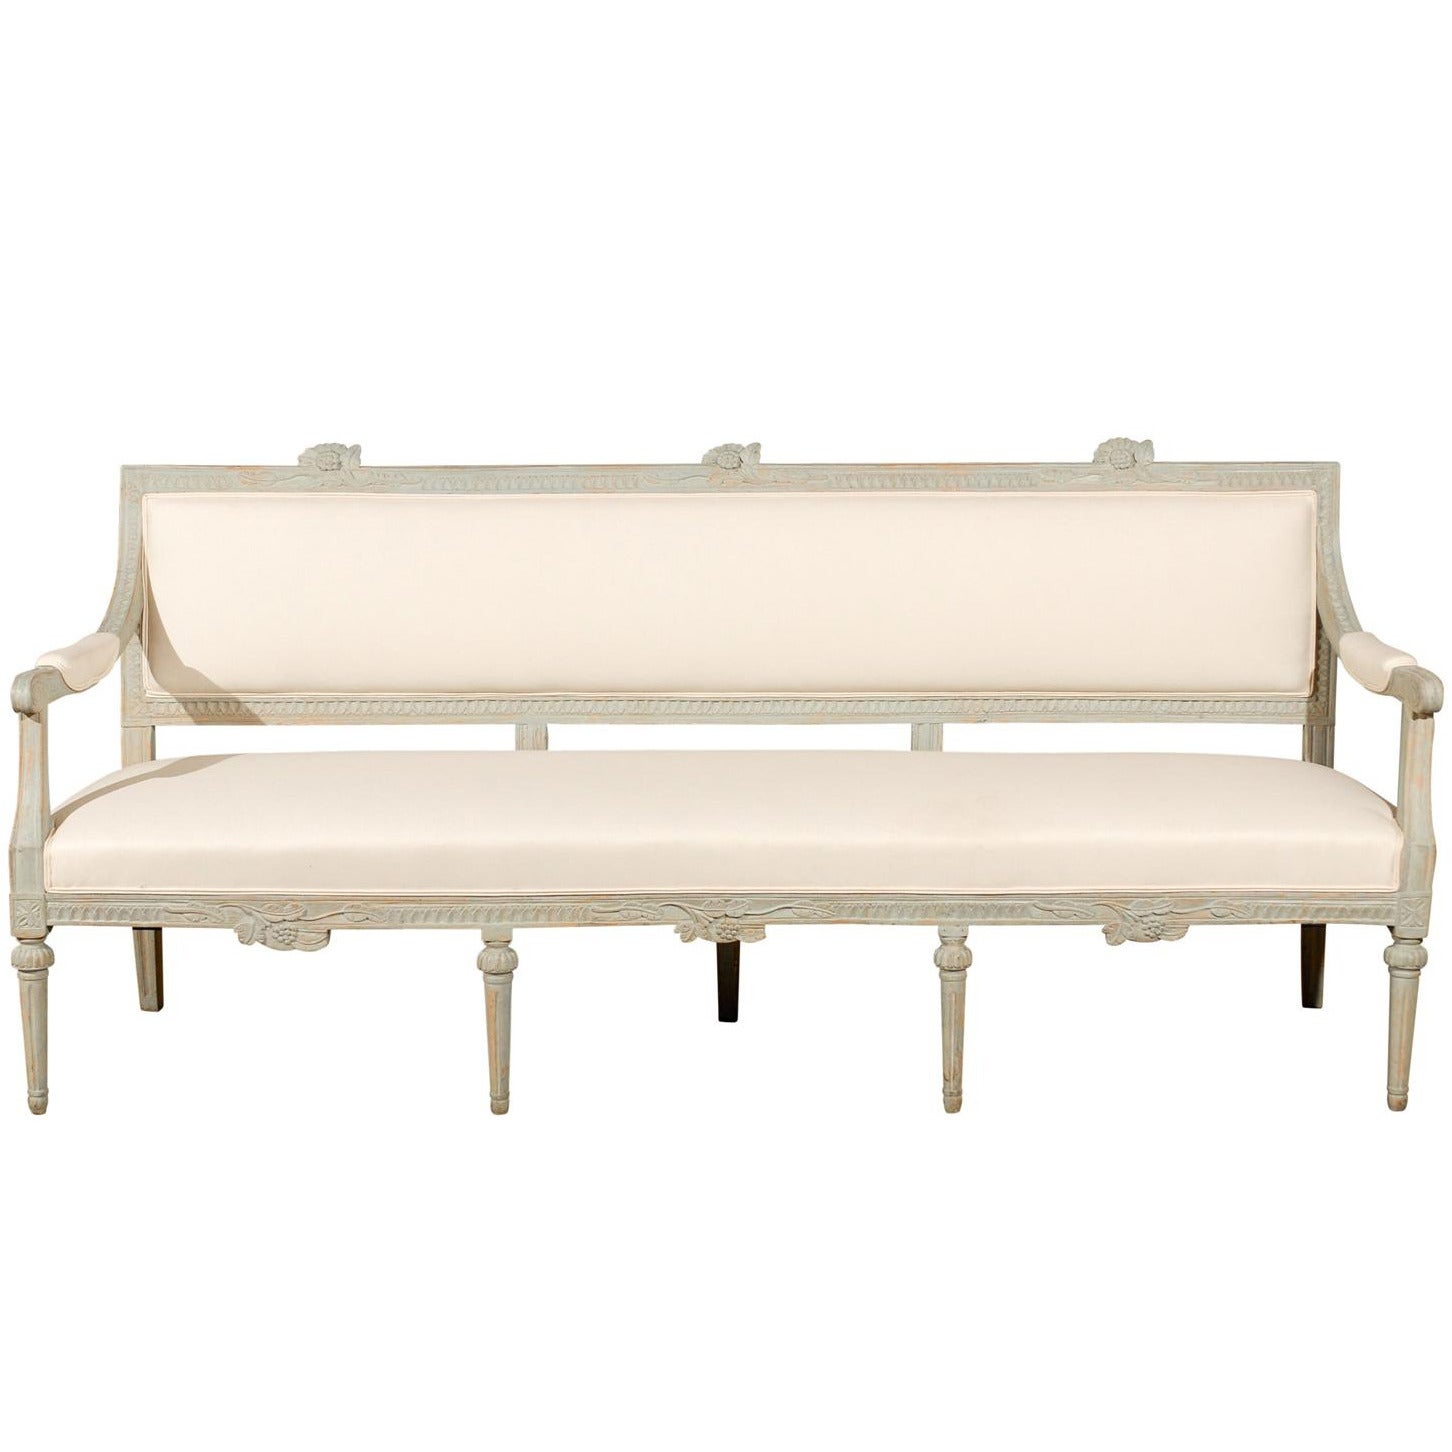 Neoclassical Revival Swedish Painted and Carved Upholstered Bench, circa 1890 For Sale